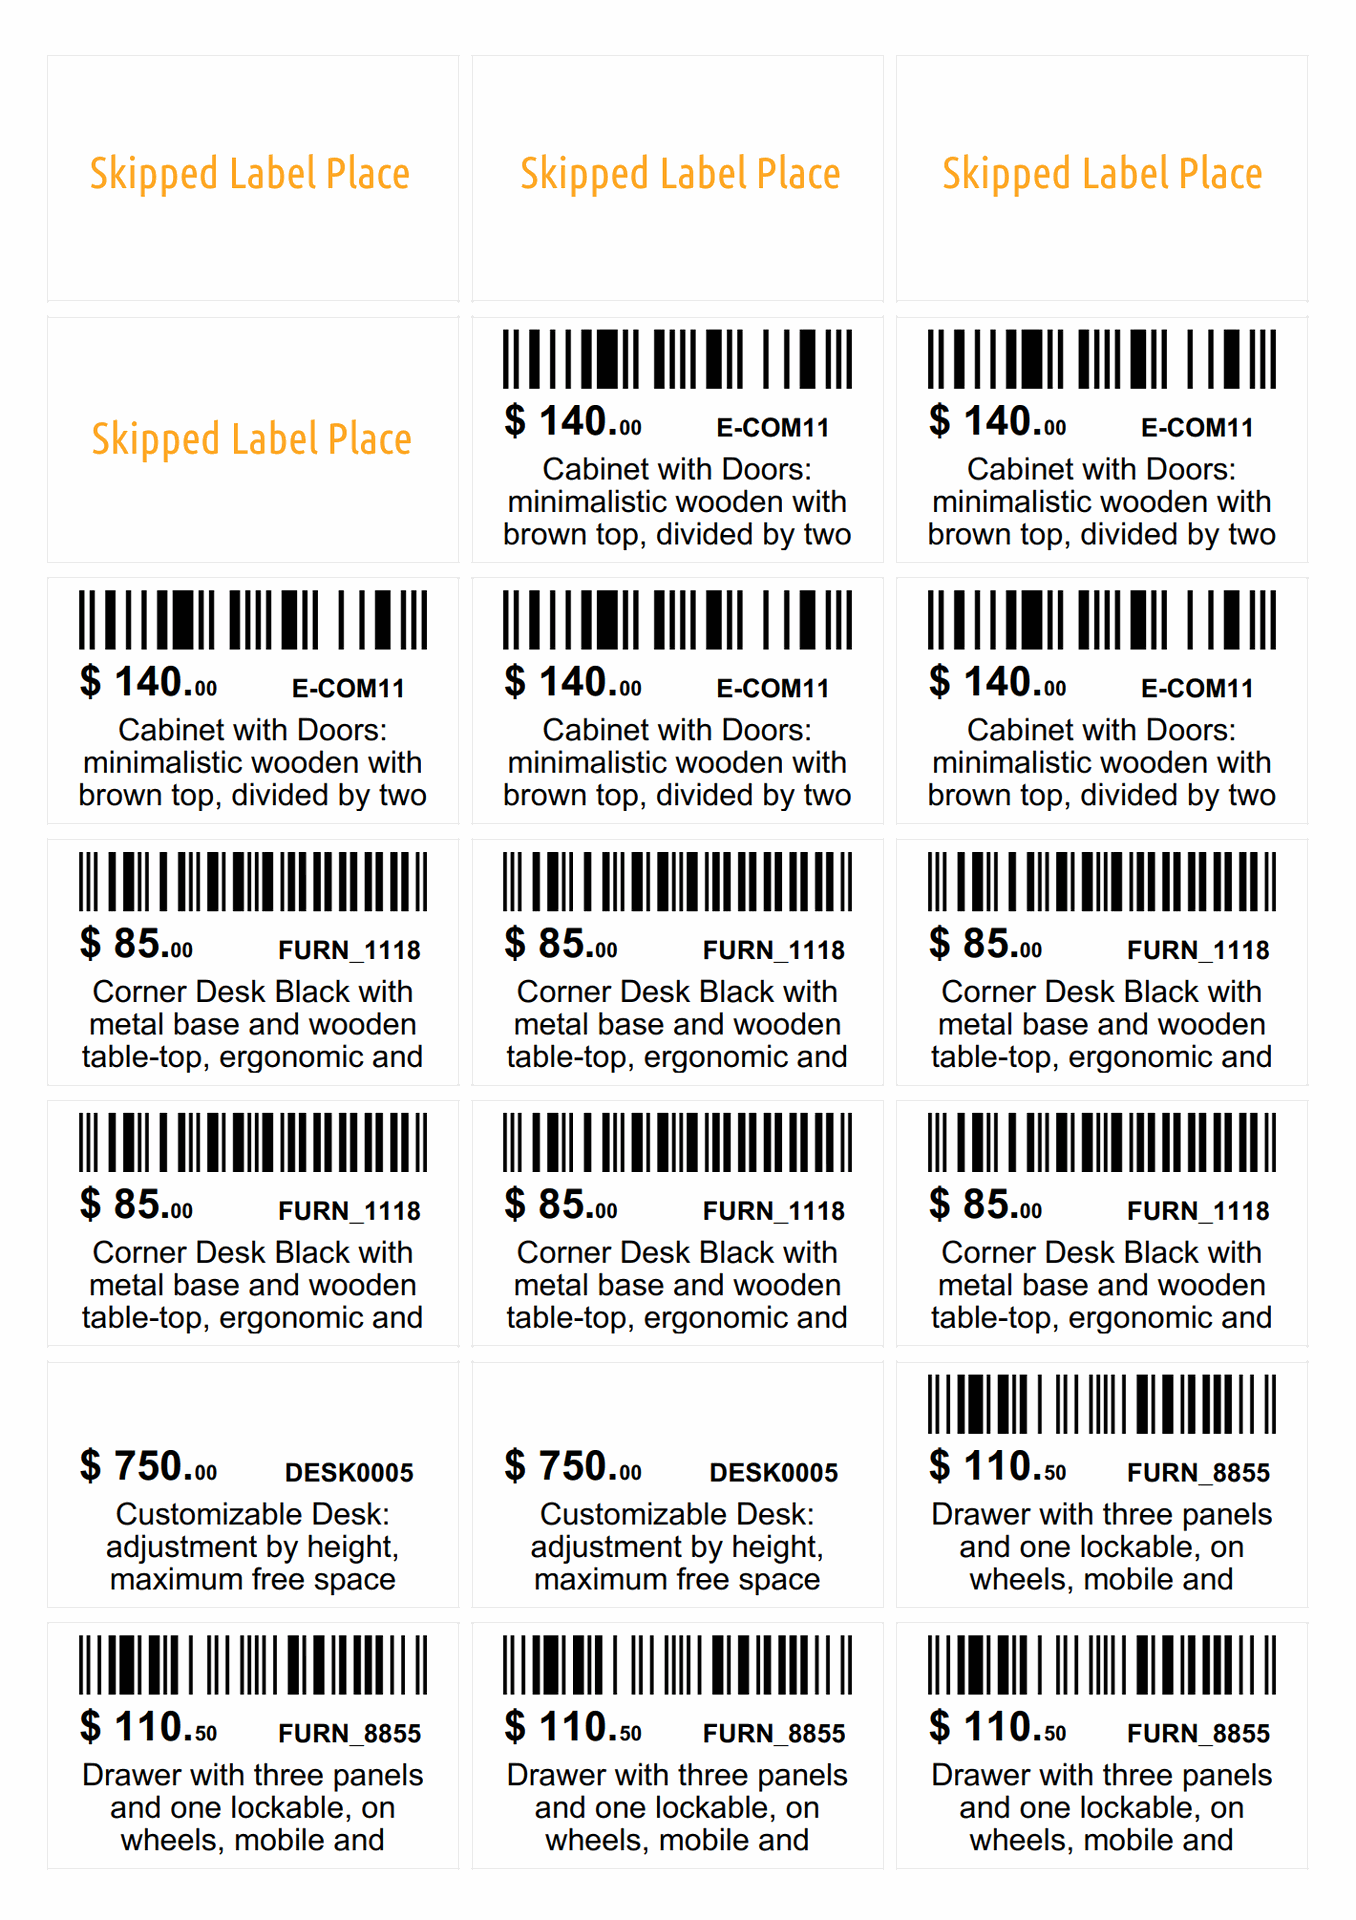 Odoo 16.0 a4 barcode product label 63 x 38 mm